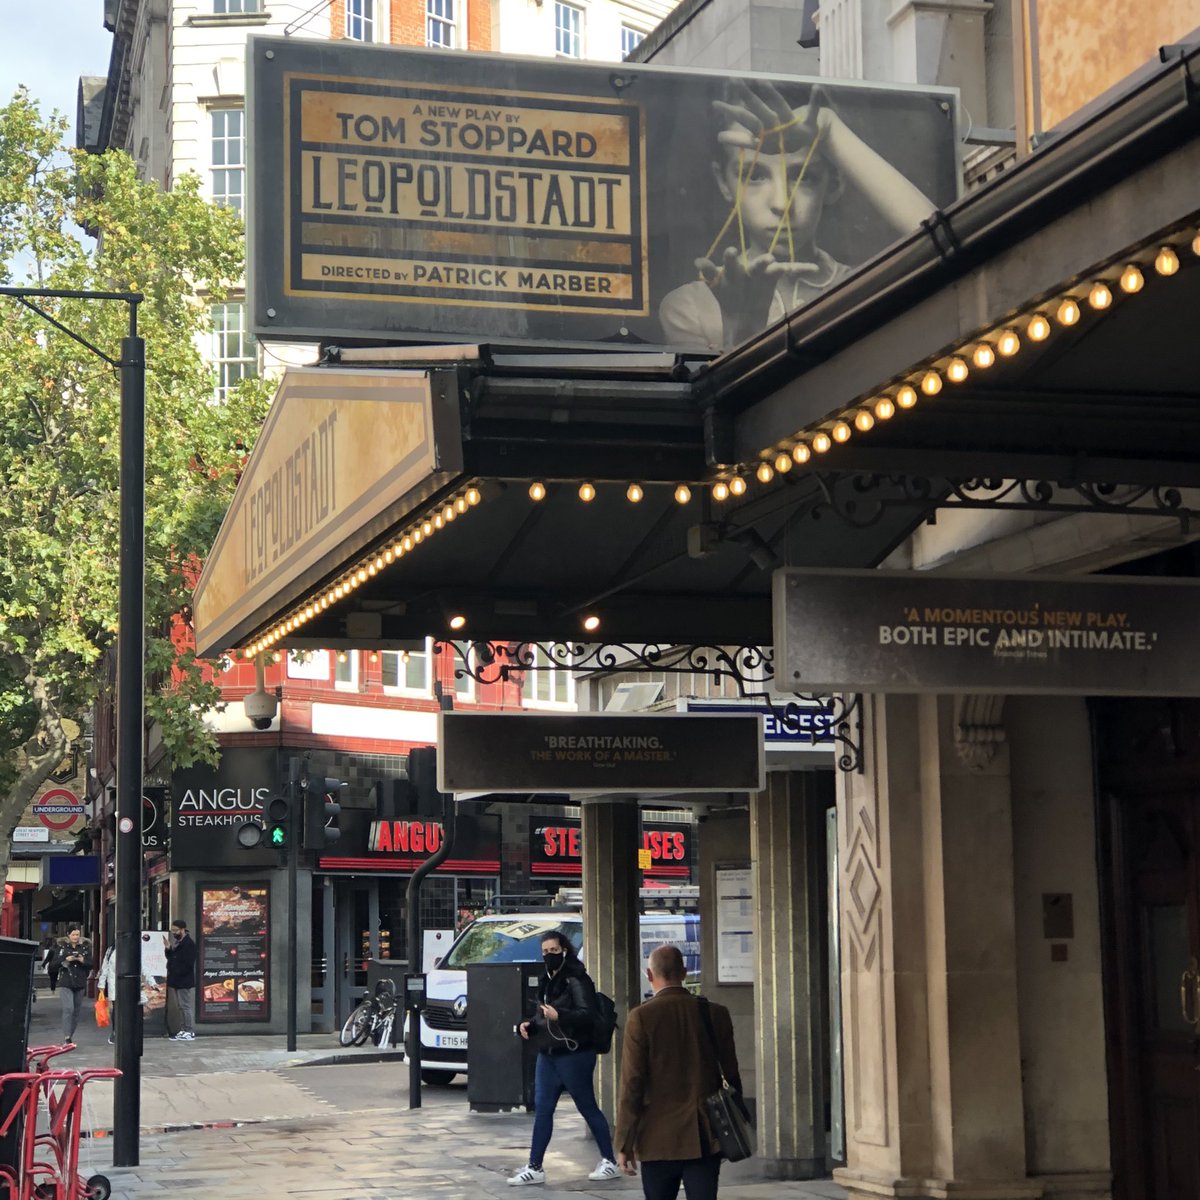 Just wanted to say “Hello” to a few old friends after I arrived @ CX station for meetings in town: I dream of seeing Tom Stoppard’s  @LeopoldstadtLDN  @WyndhamsTheatre again.  #TheShowMustGoOn